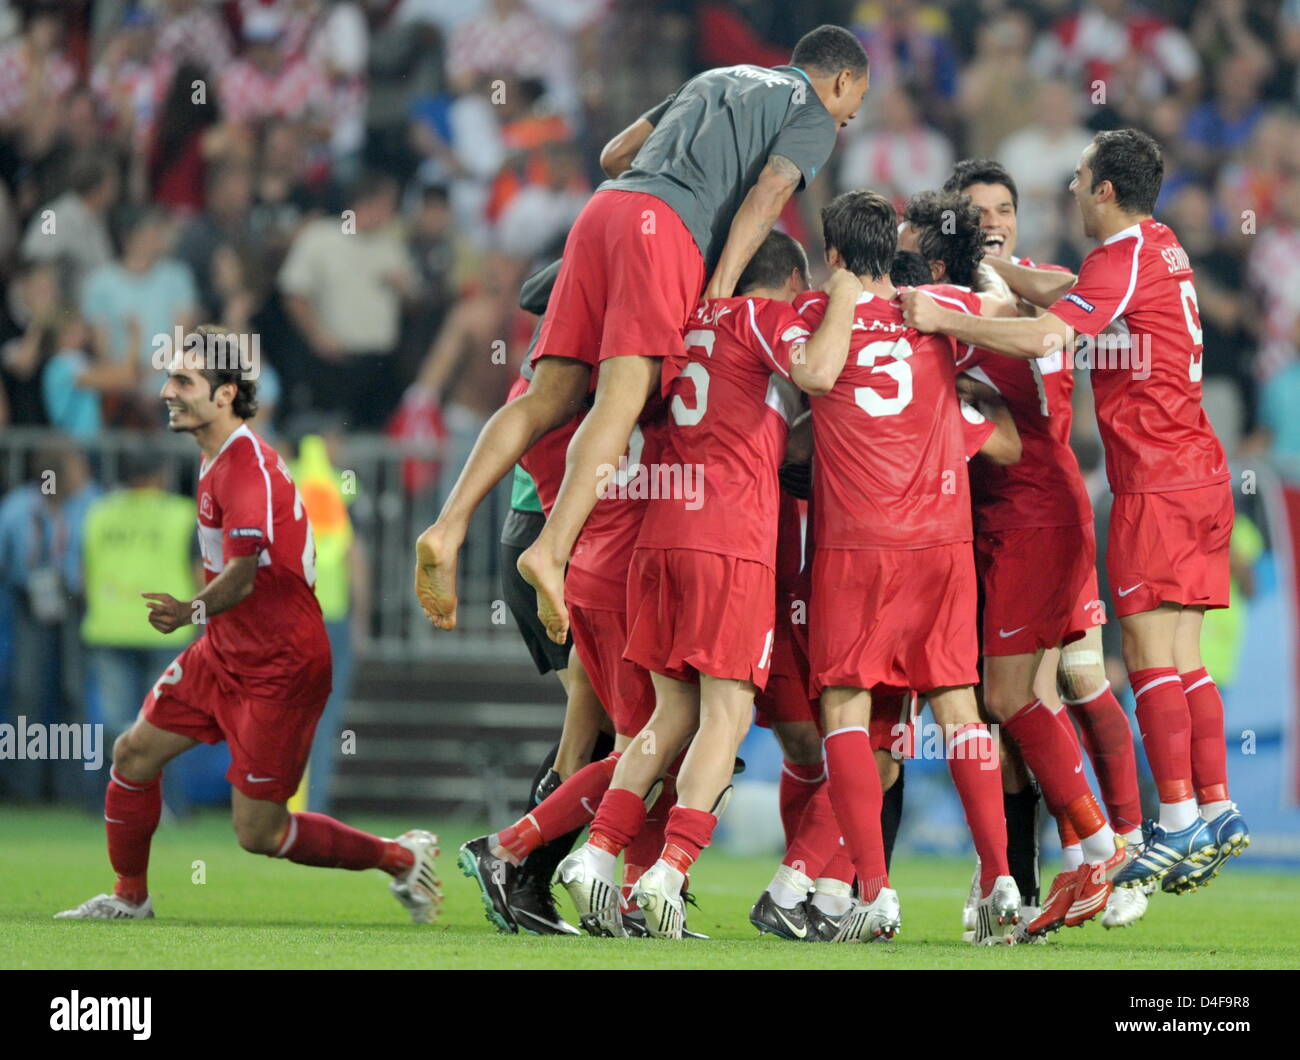 Hamit Altintop of Turkey (L) jubilates with his teammates after the UEFA EURO 2008 quarter final match between Croatia and Turkey at the Ernst Happel stadium in Vienna, Austria, 20 June 2008. Turkey won 1:3 in penalty shootout. Photo: Achim Scheidemann dpa +please note UEFA restrictions particulary in regard to slide shows and 'No Mobile Services'+ +++(c) dpa - Bildfunk+++ Stock Photo